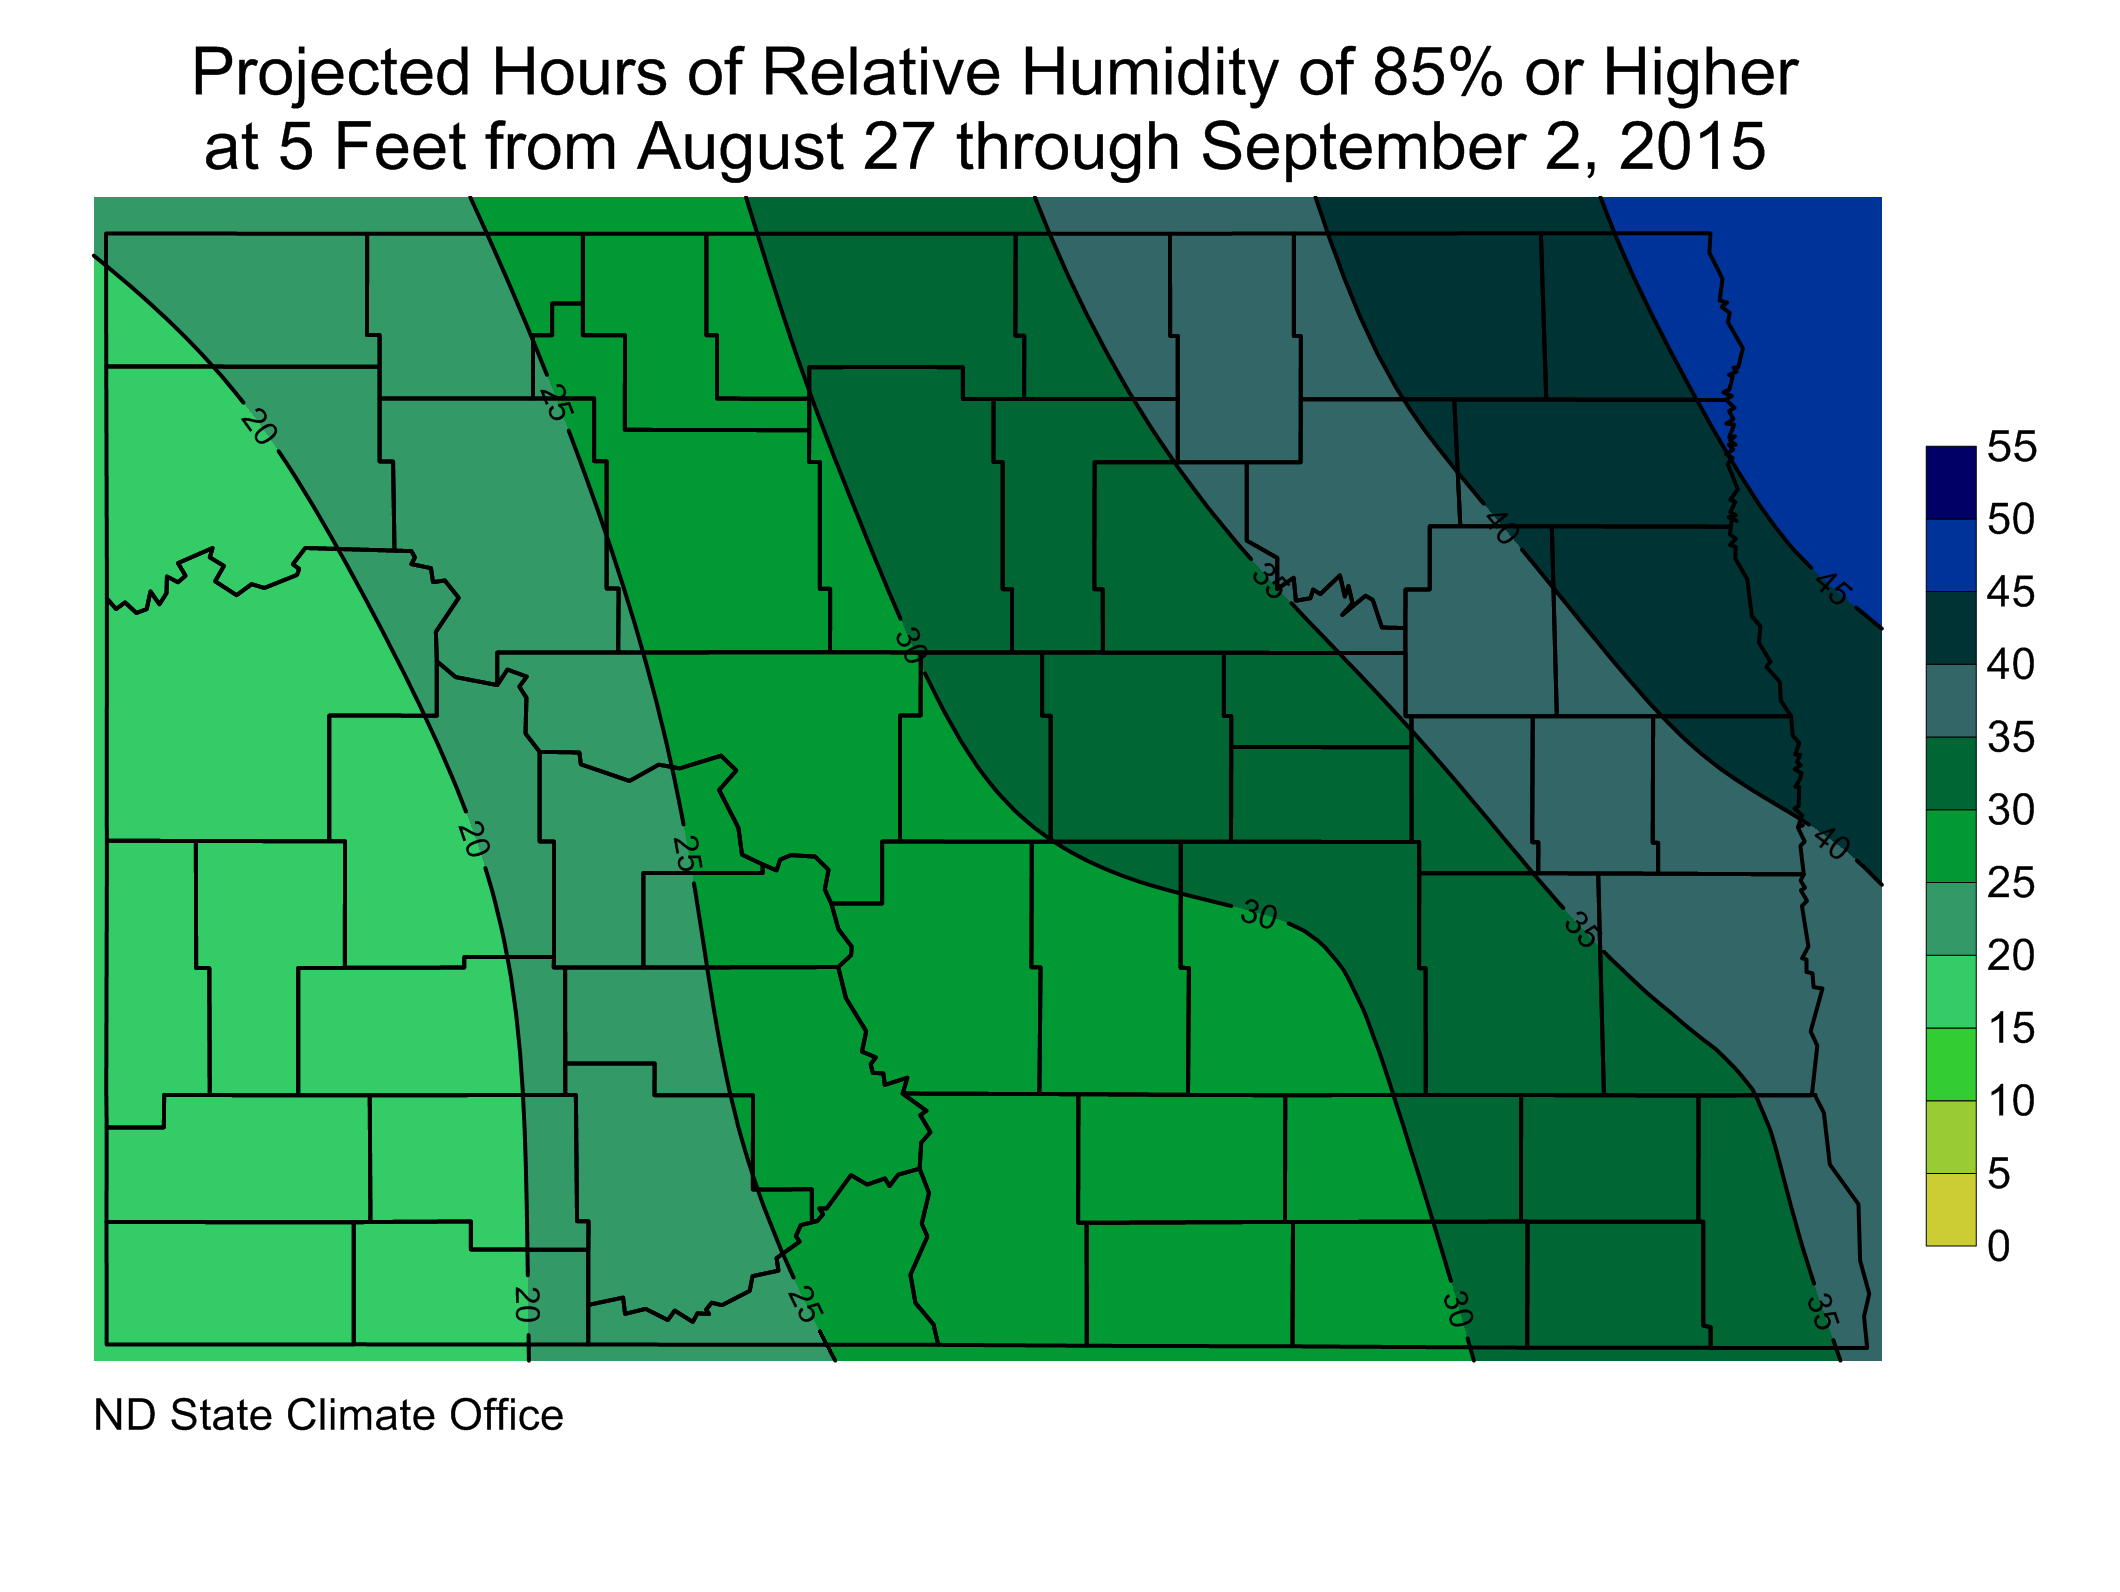 Figure 3. Projected Hours at/above 85% Relative Humidity from August 27 through September 2, 2015